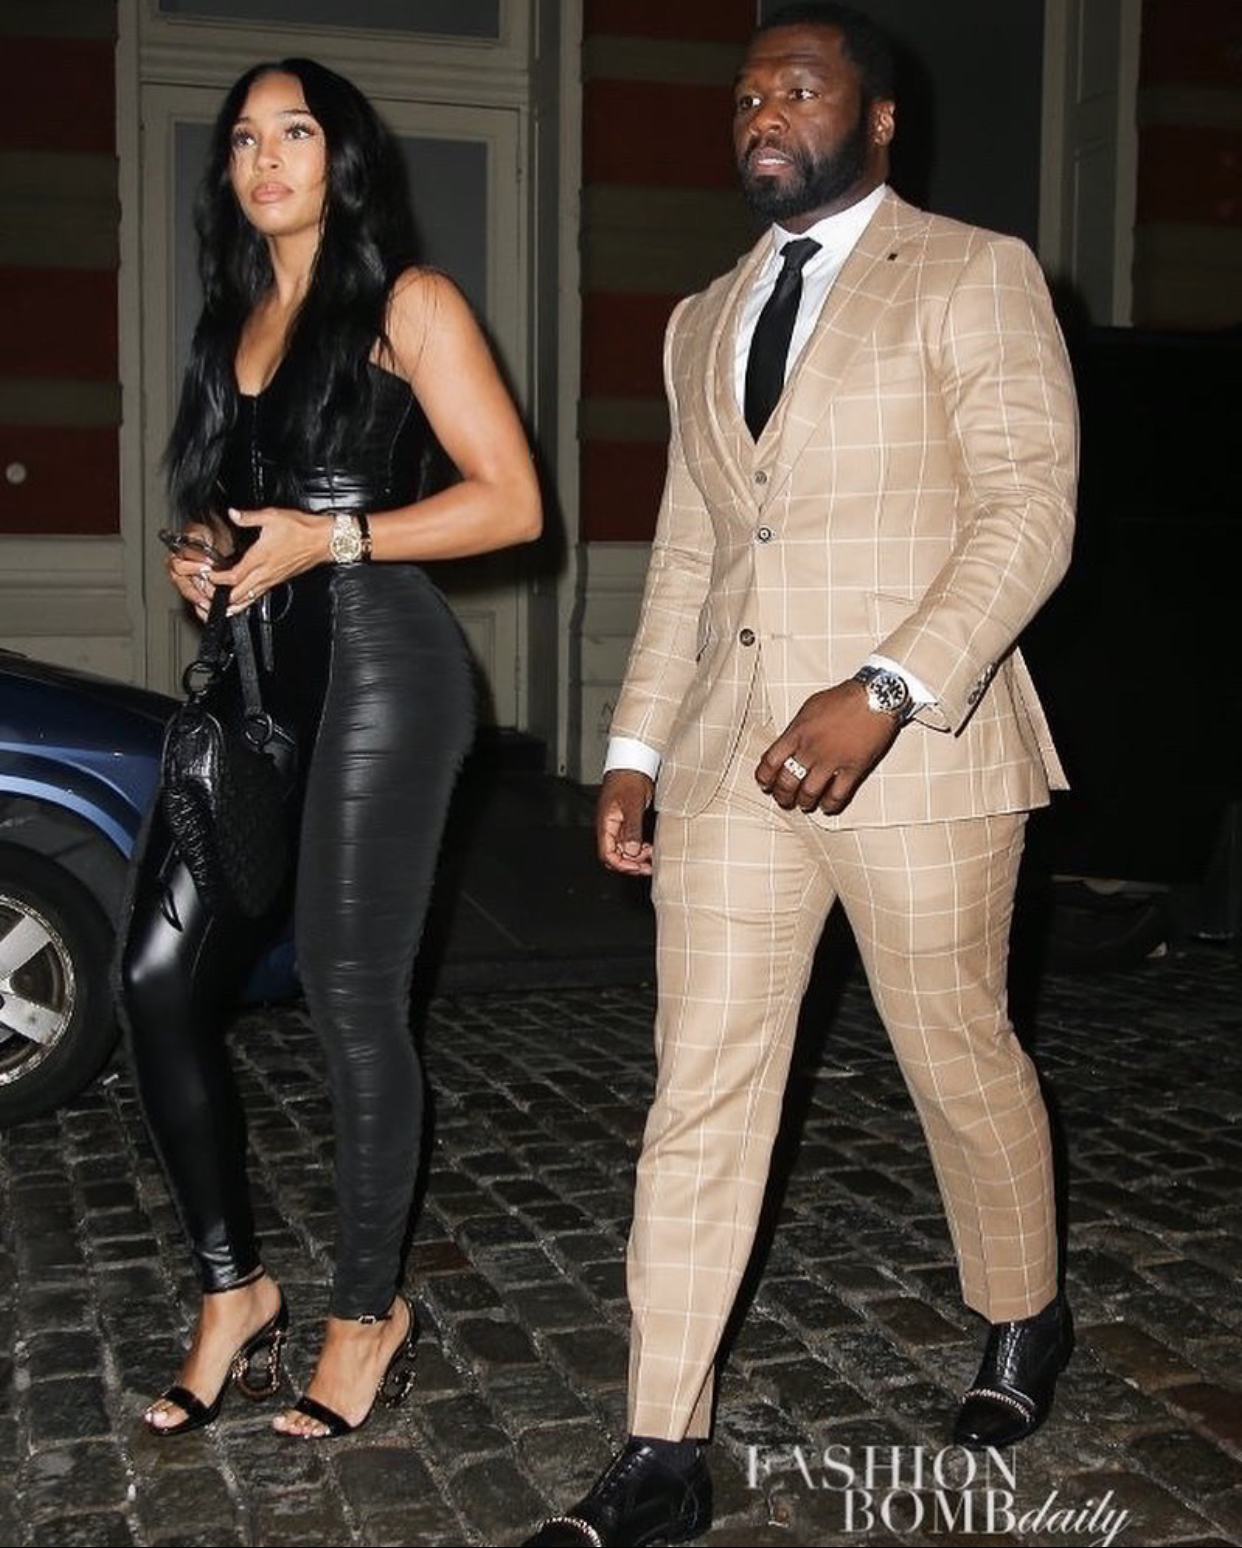 On the Scene at the 'Power Book III: Raising Kanan' 90s Theme Premiere  Party: 50 Cent in Dapper Dan x Gucci Look, Cuban Link in Custom Gucci Set  by Devon Milan, DaBaby